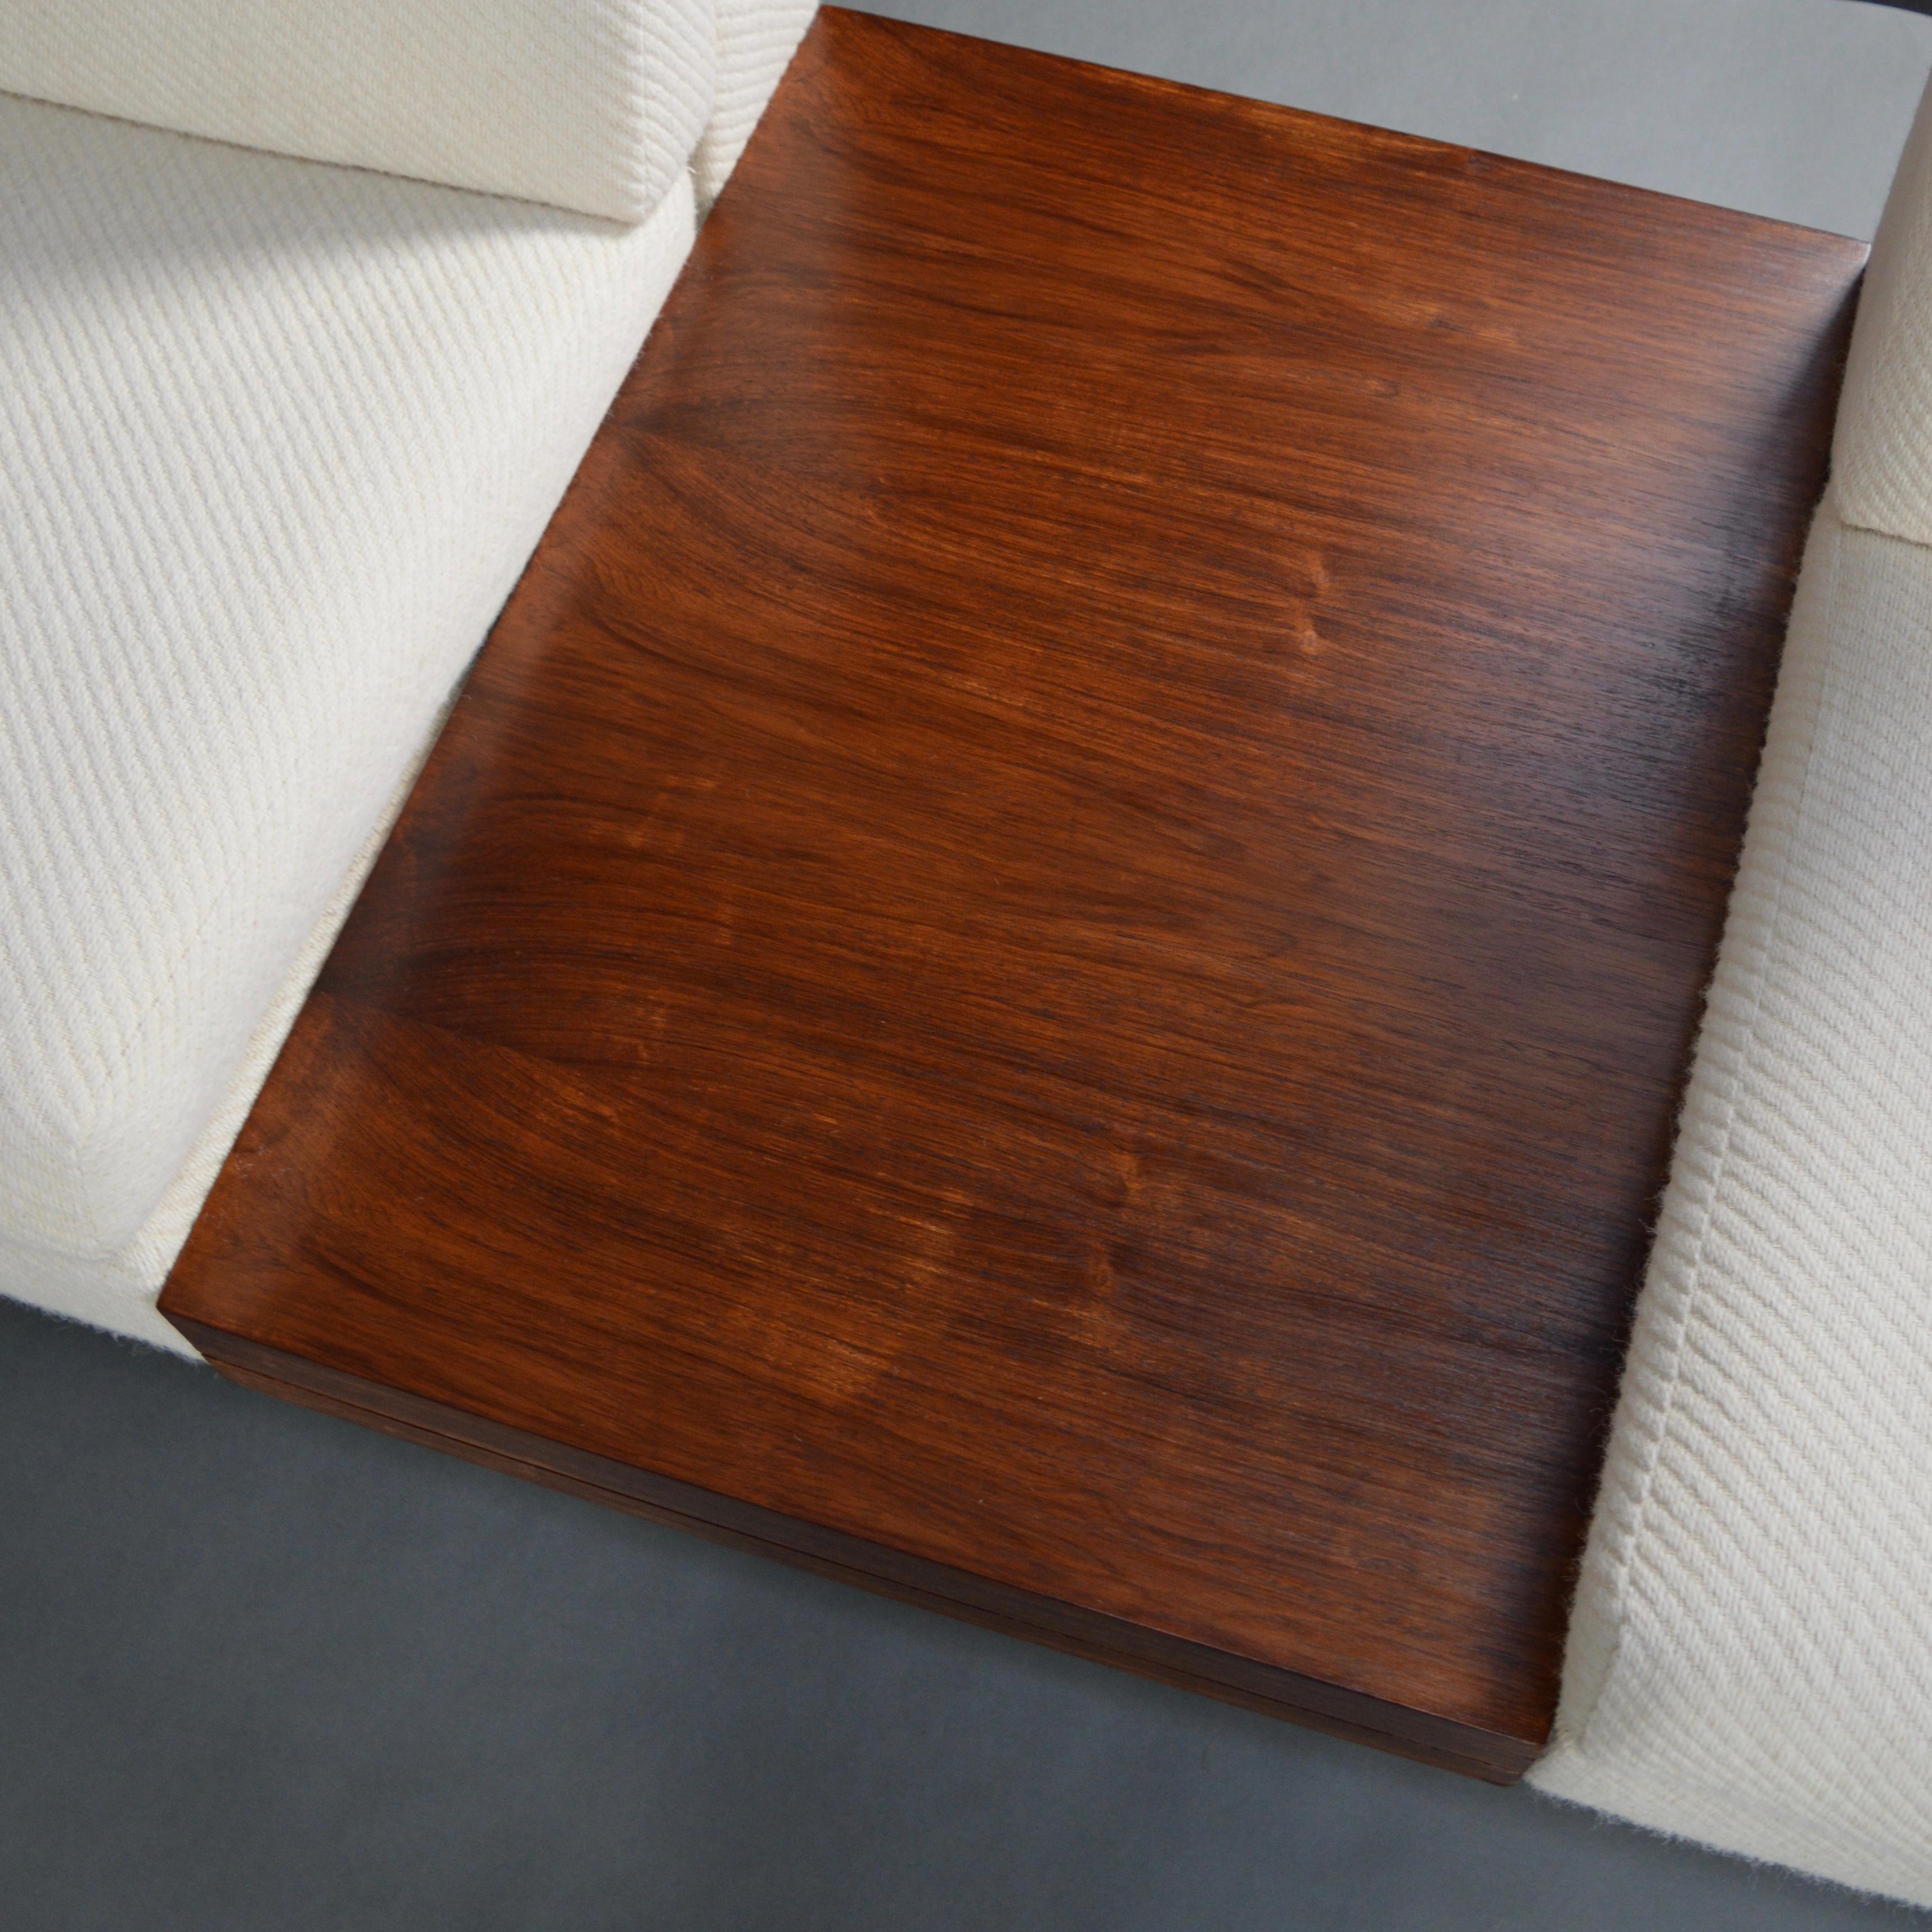 Rolf Benz First Edition Pluraform Sofa with Rosewood Coffee Tables, 1964 9